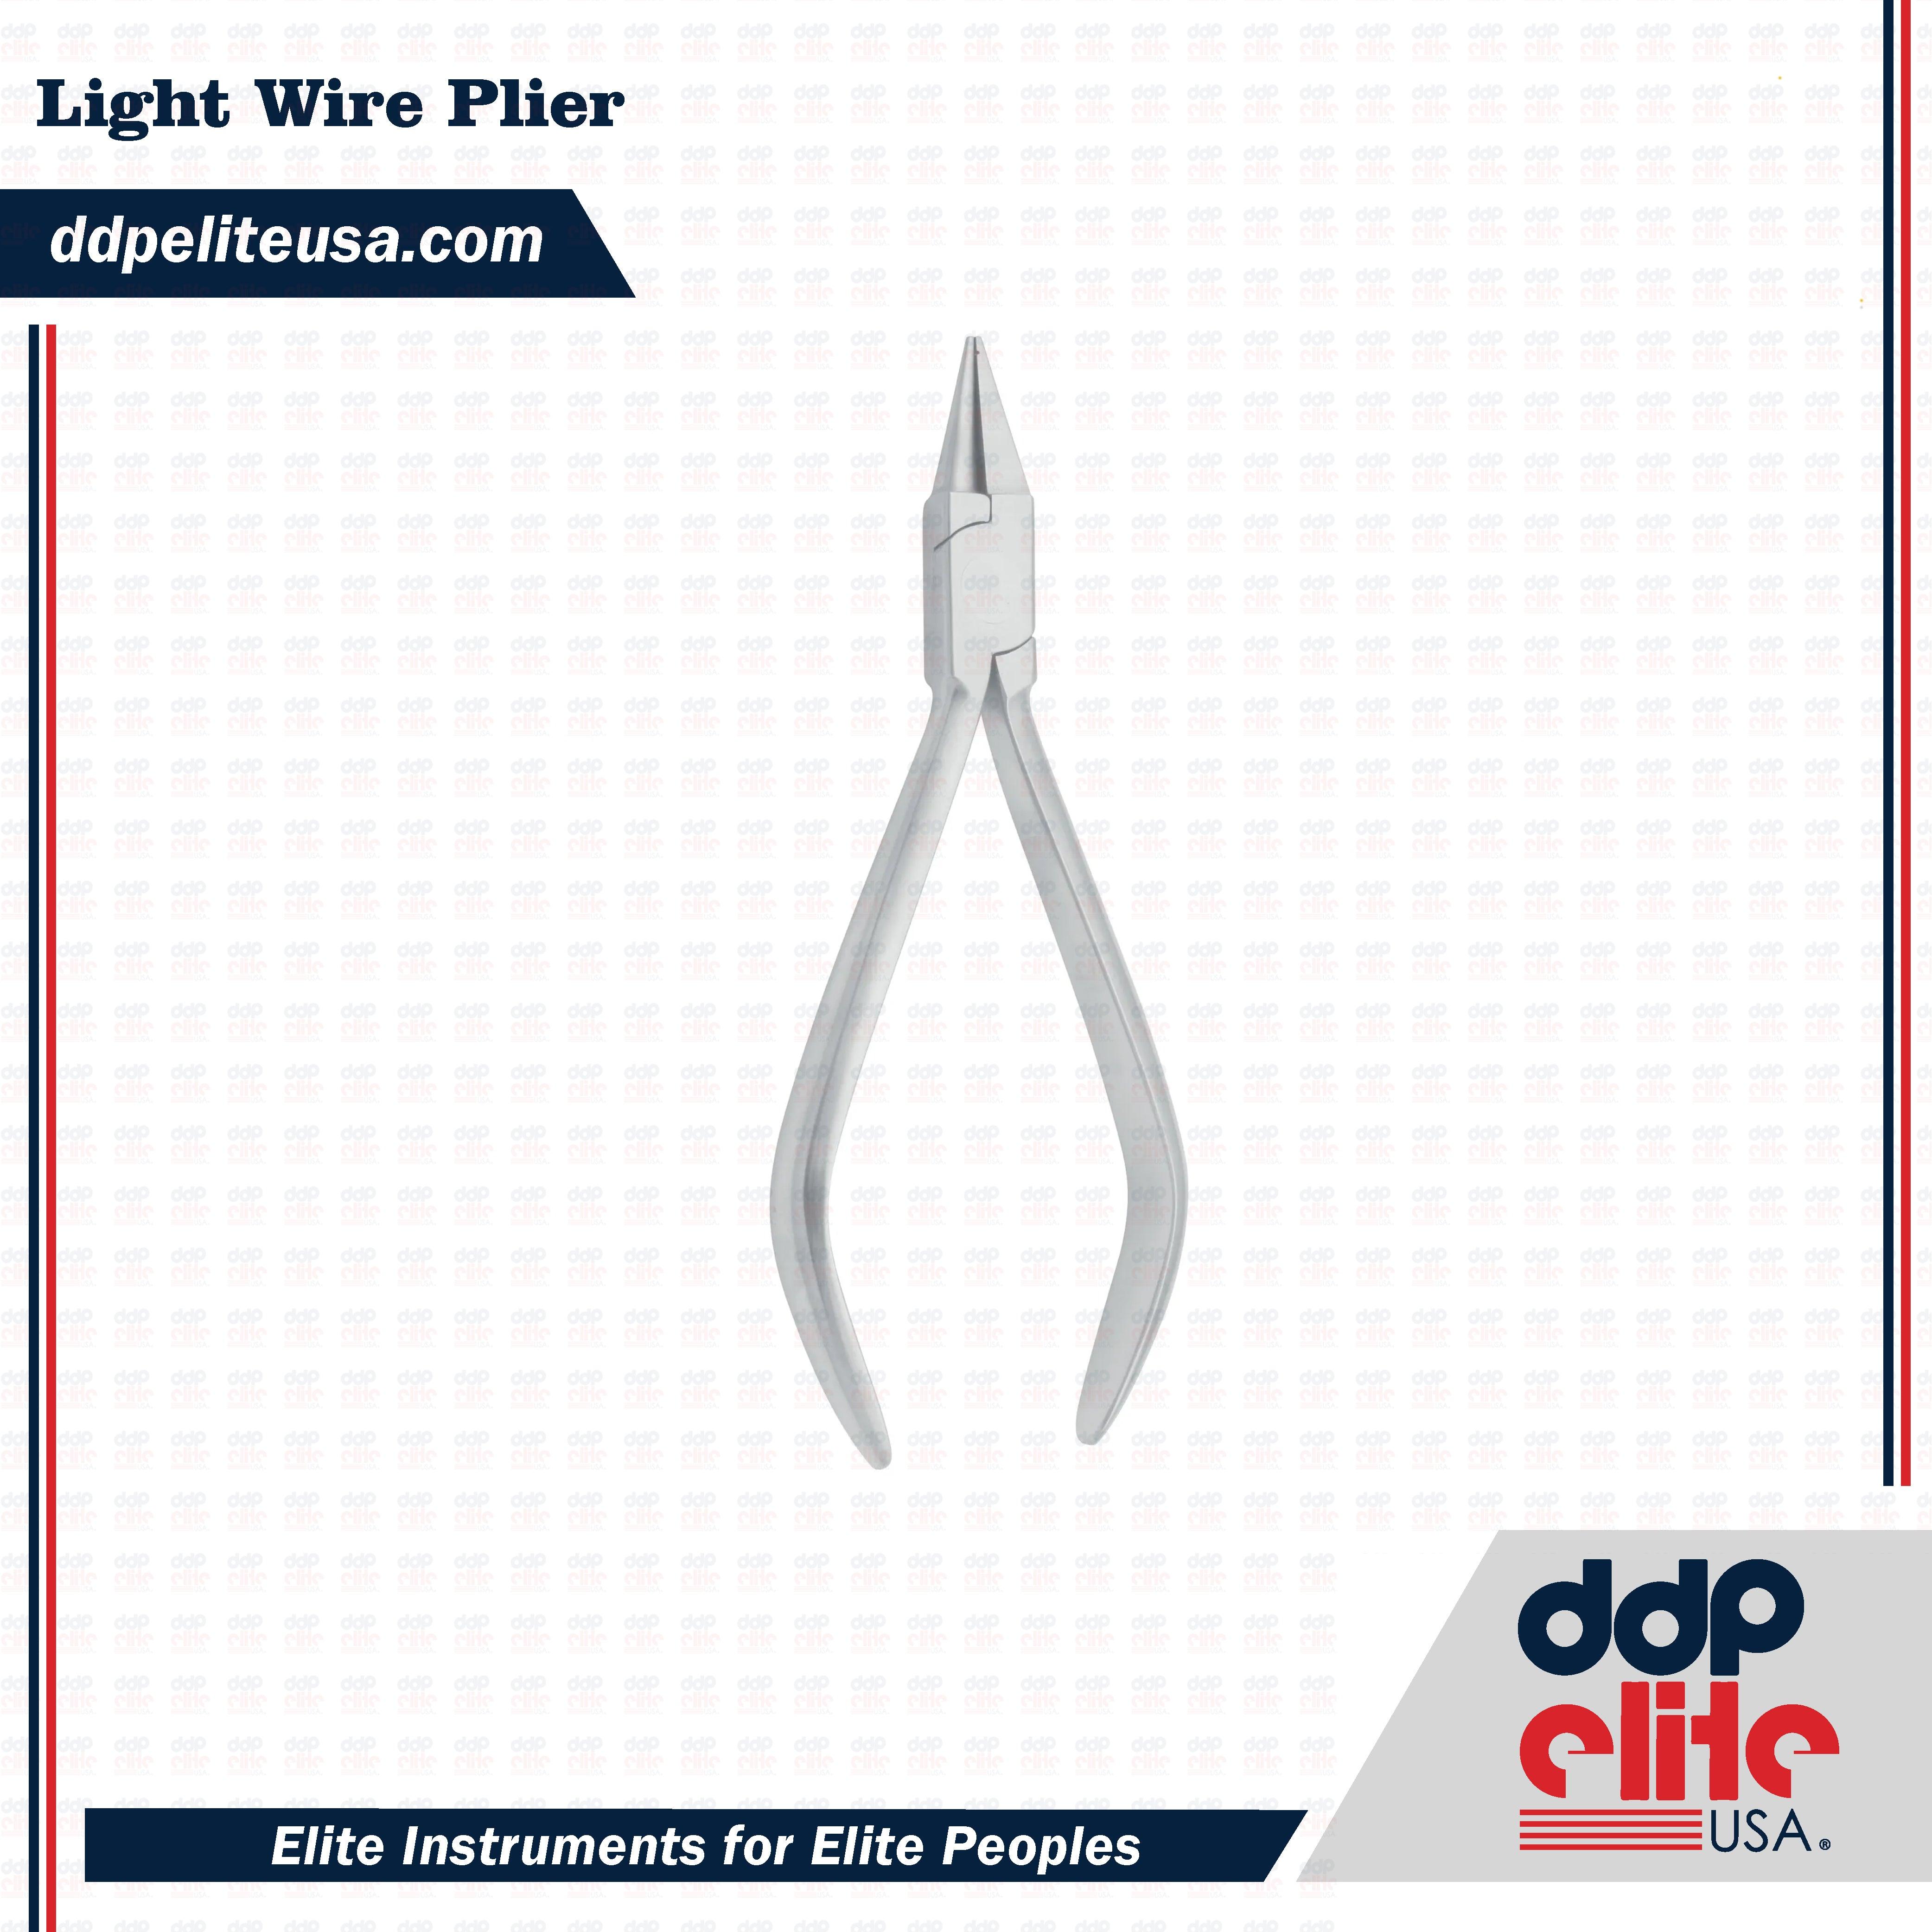 Light Wire Pliers – Golden State Orthodontic Supply